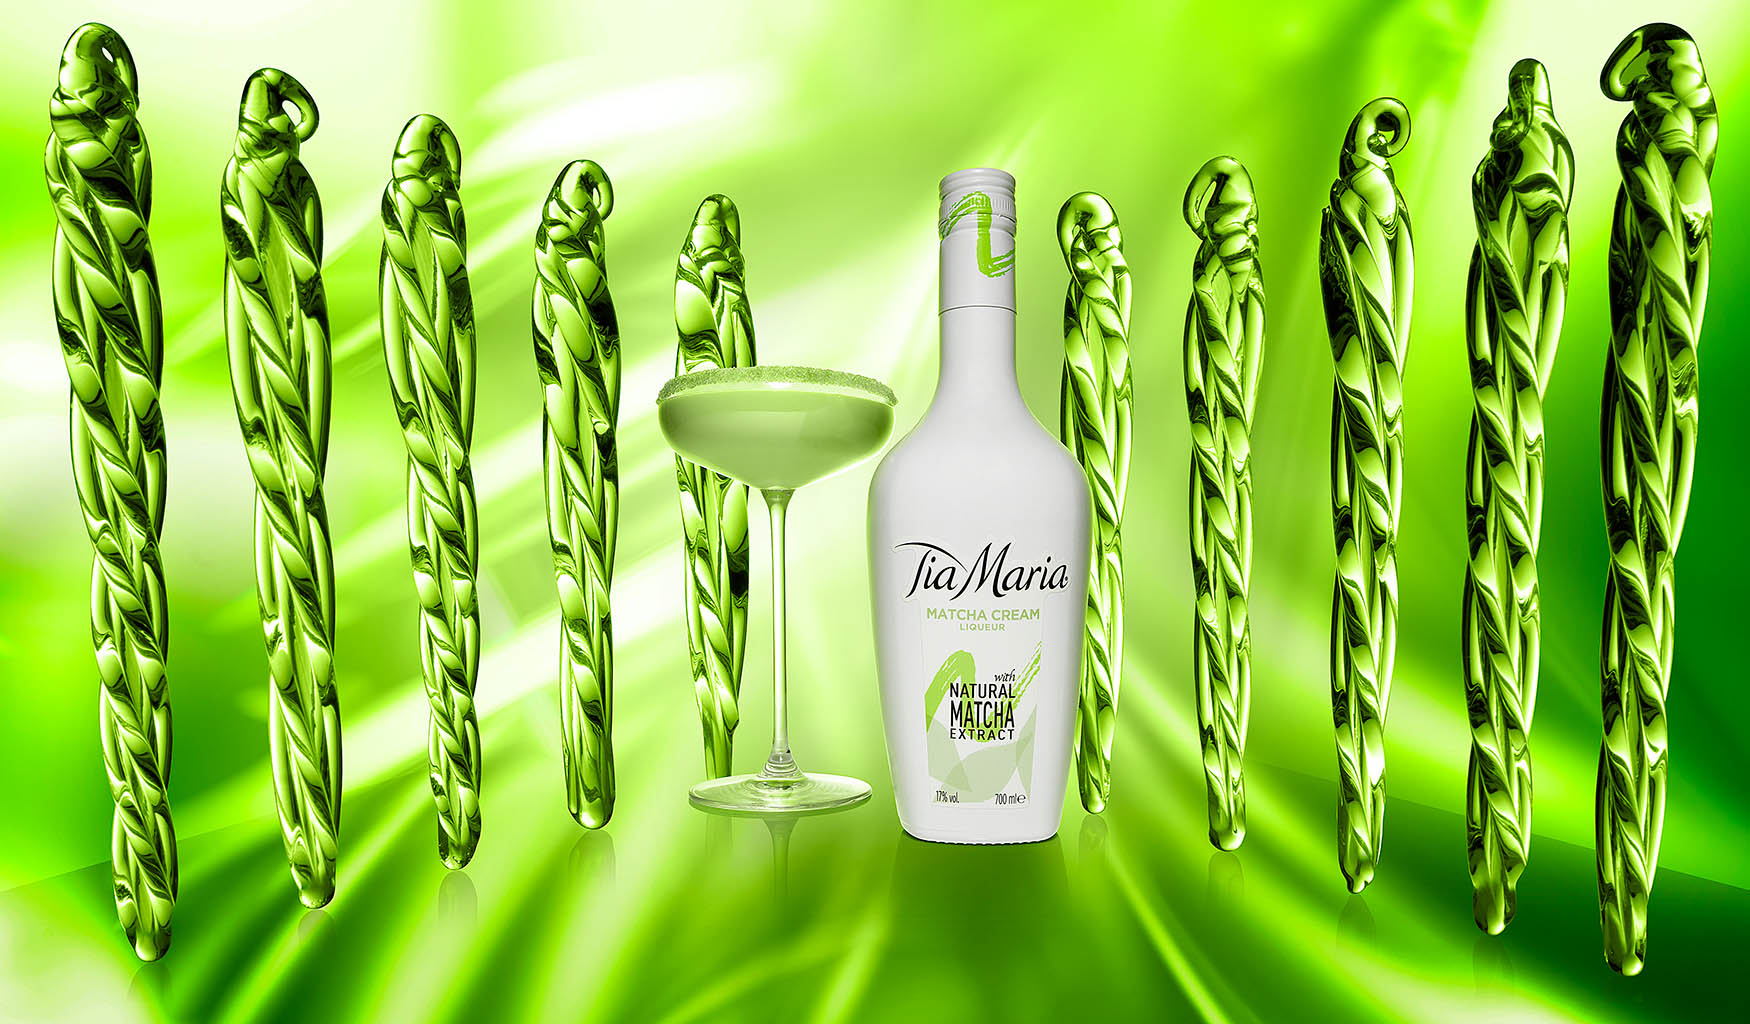 Packshot Factory - Coloured background - Tia Maria Matcha bottle and serve with icicles